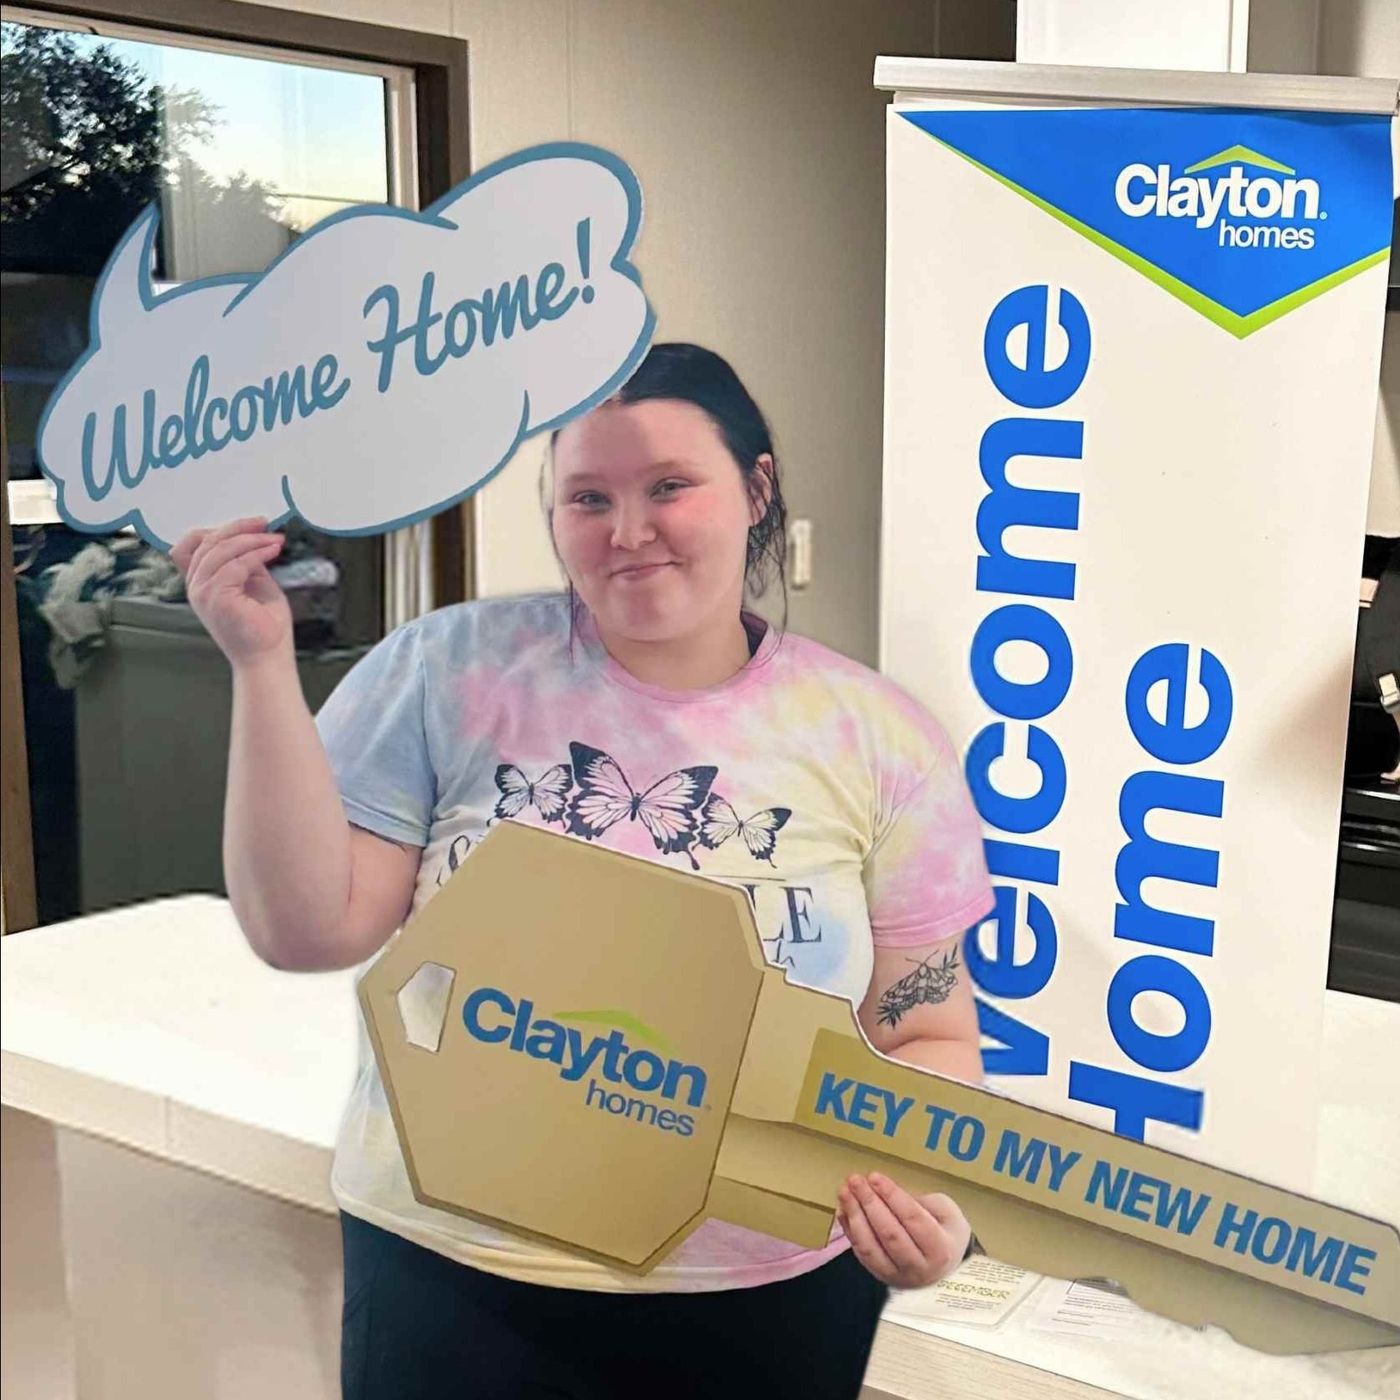 OLIVIA R. welcome home image